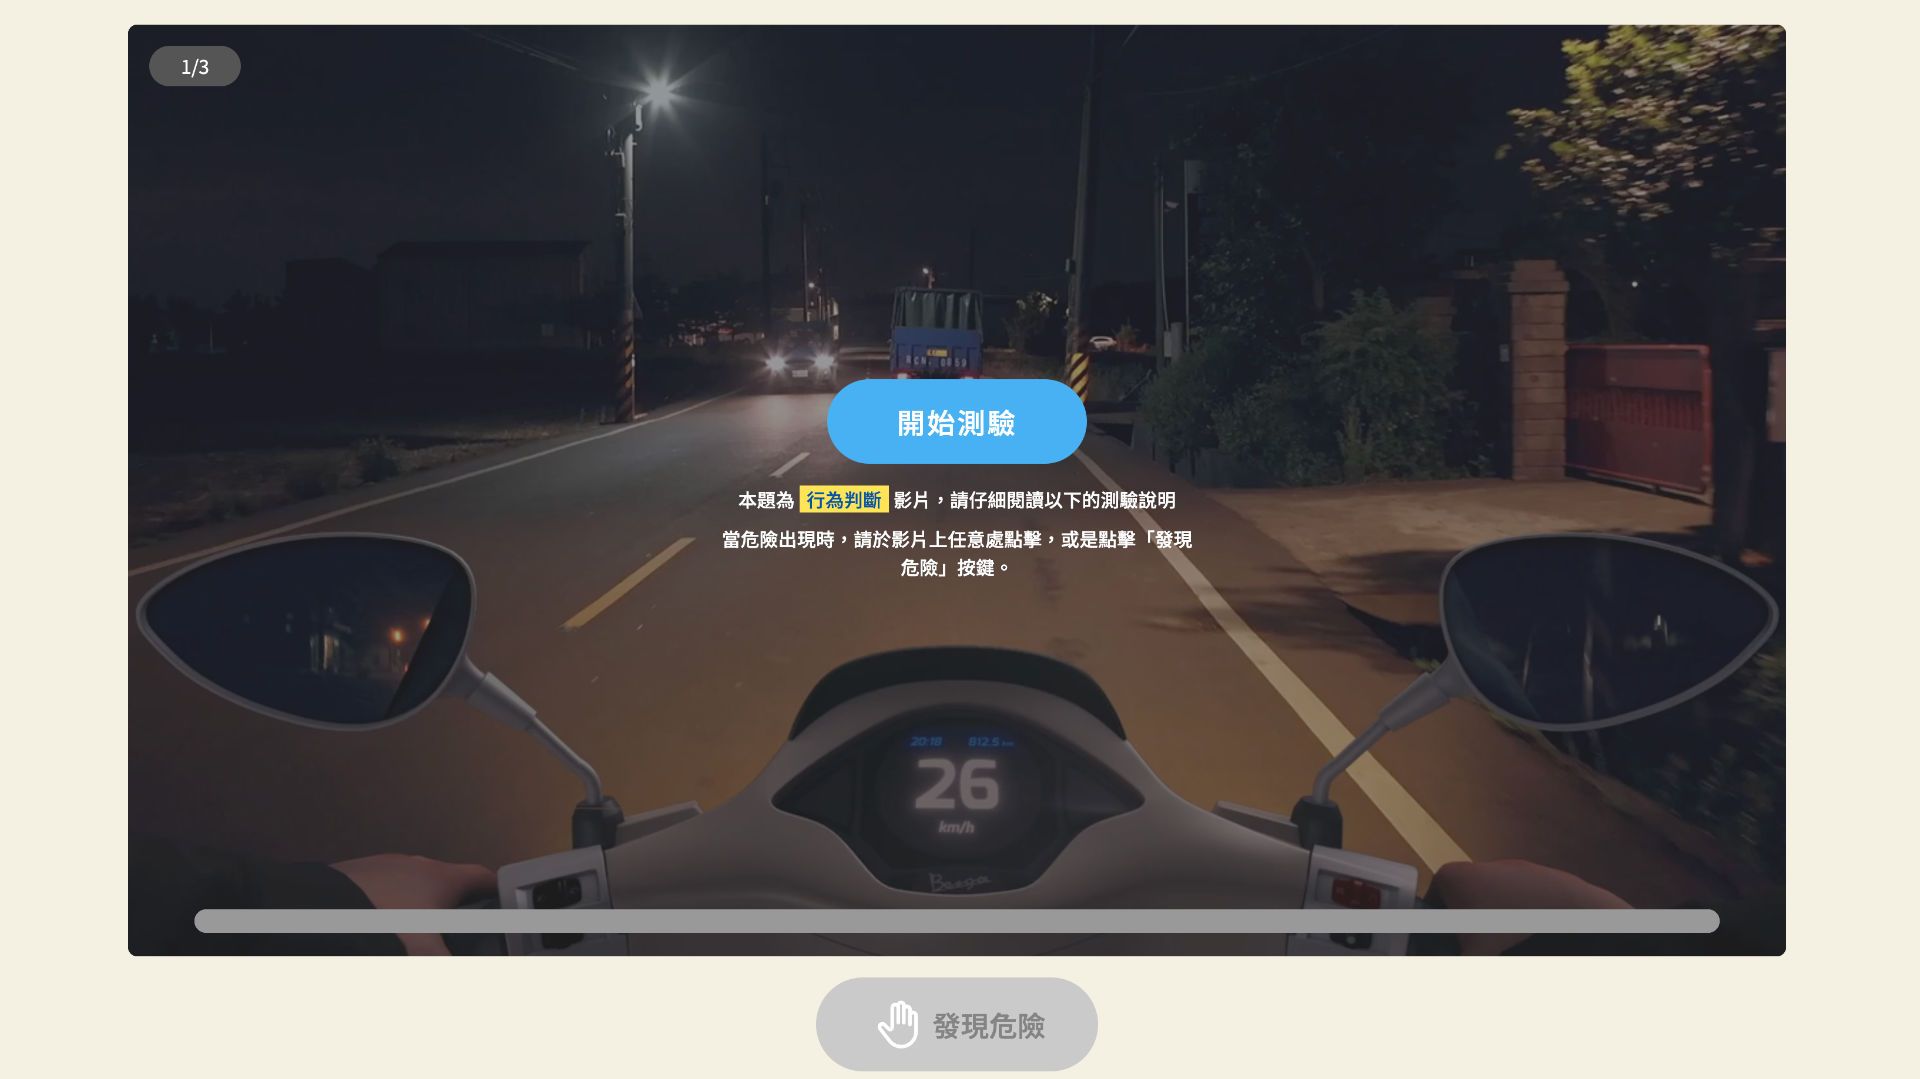 Screenshot of the online hazard assessment test. It shows a motorcycle driving along a two-lane road at night, from the perspective of the motorcycle rider.